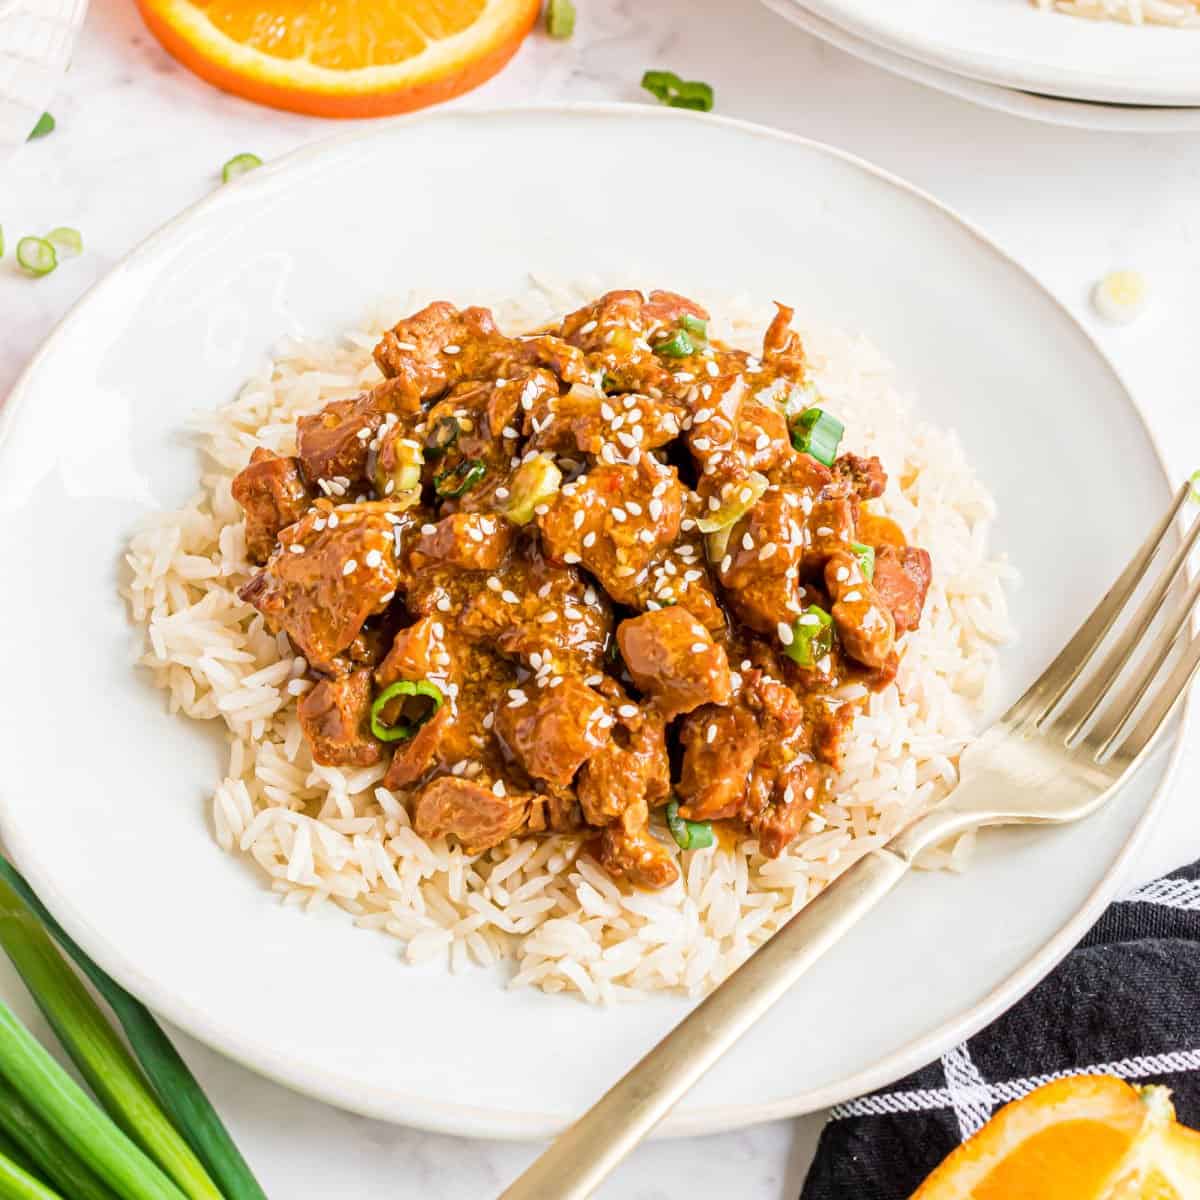 Our 10 Most Popular Slow Cooker Recipes This Year  Slow cooker recipes,  Cooker recipes, Orange chicken recipe slow cooker